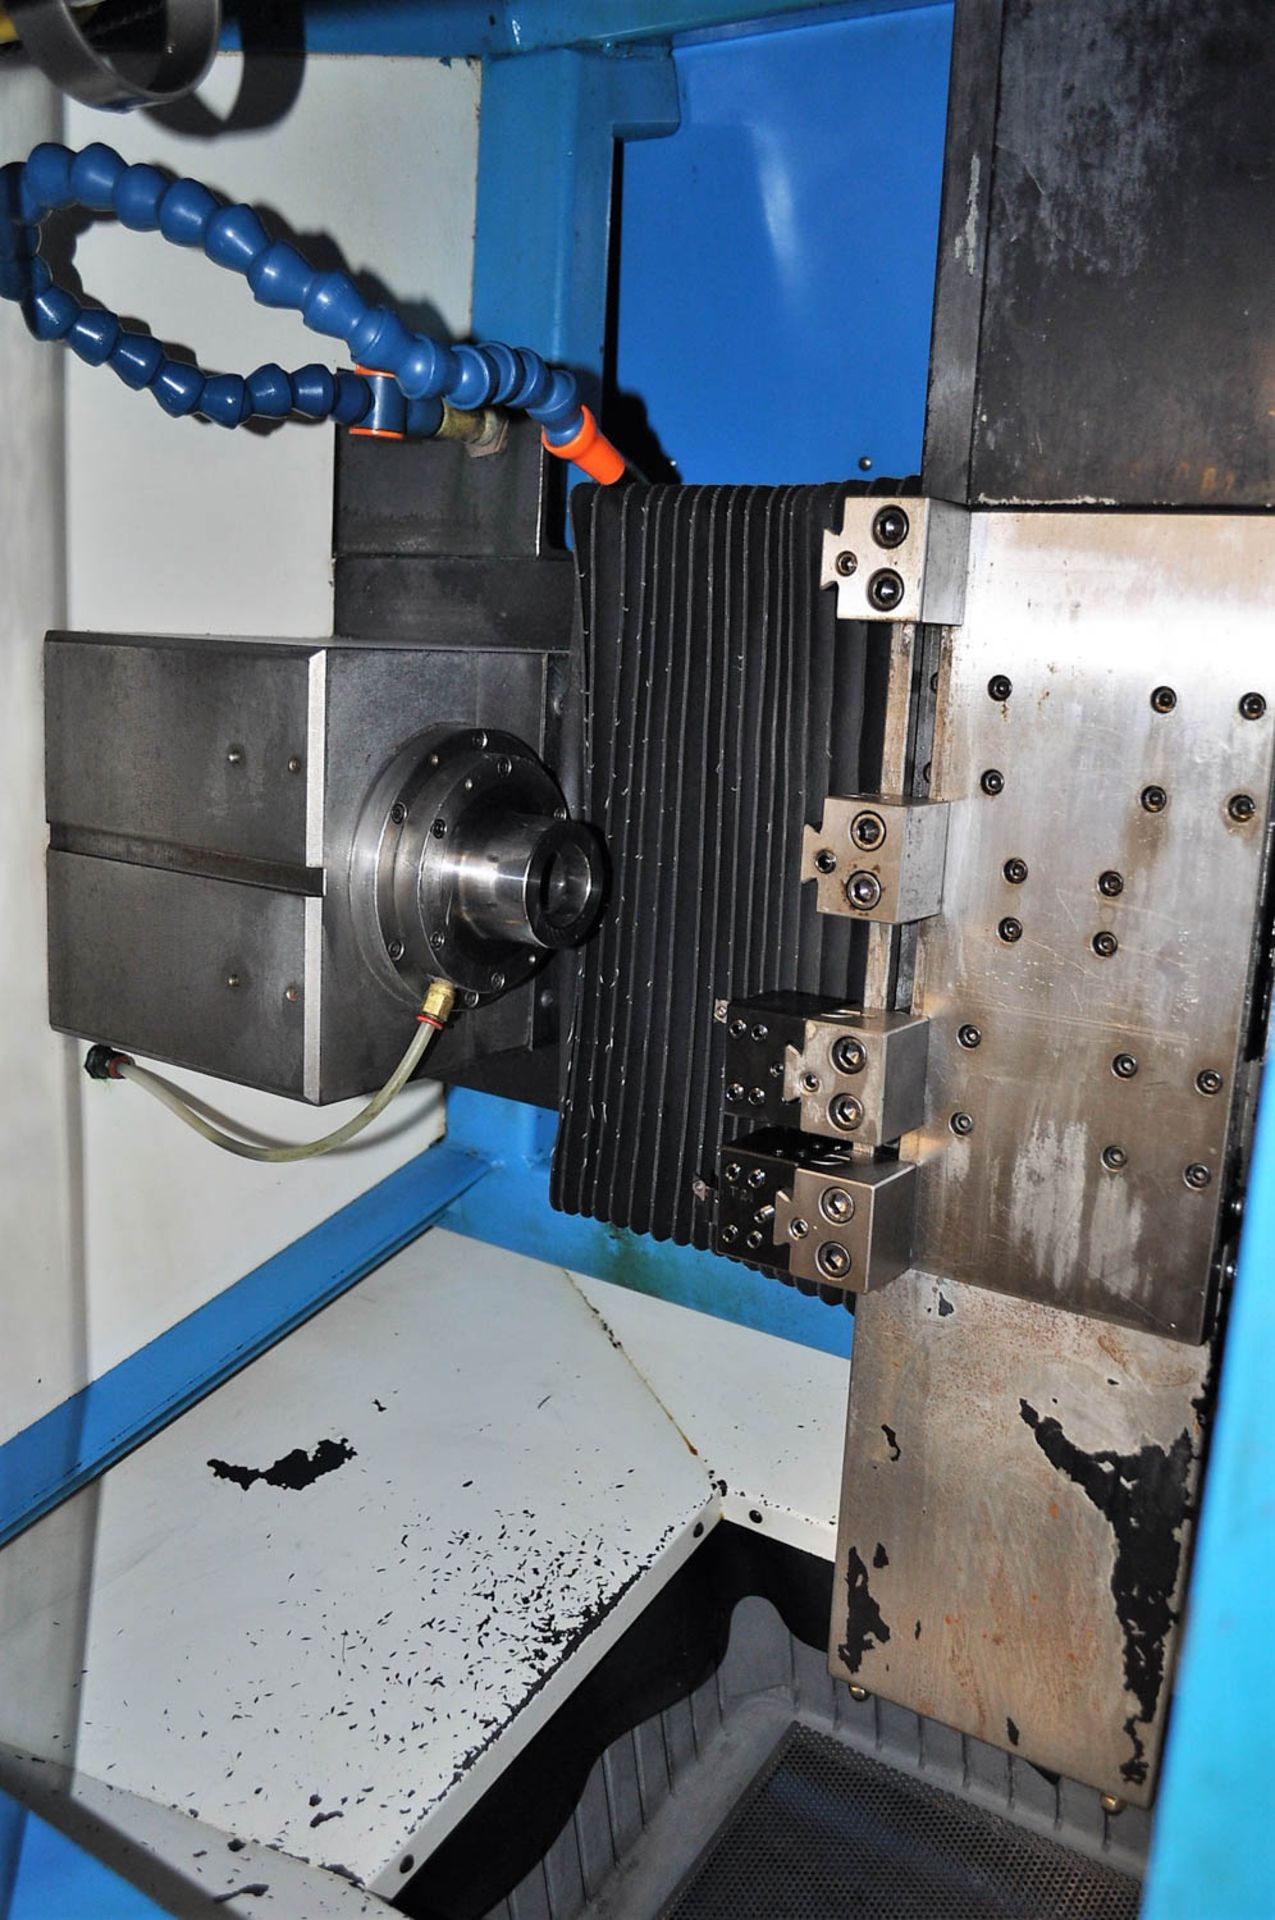 OMNITURN MDL. GT-75 2-AXIS CNC TURNING CENTER, WITH 5-C COLLET CHUCK, TOOL SLIDE, OMNITURN CNC - Image 2 of 4